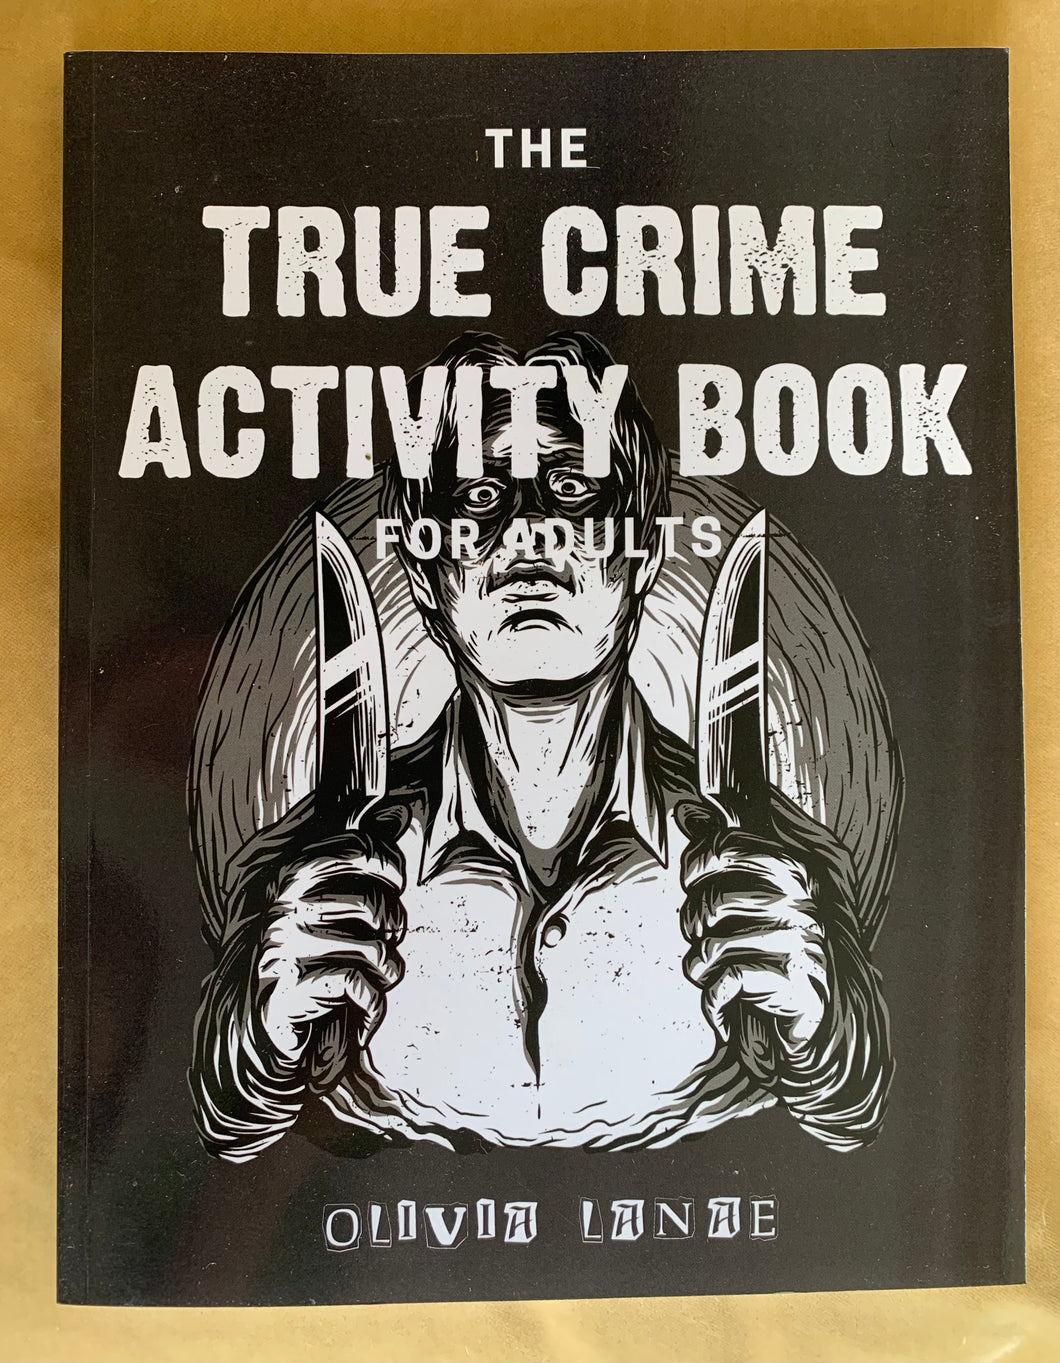 The True Crime Activity Book for Adults